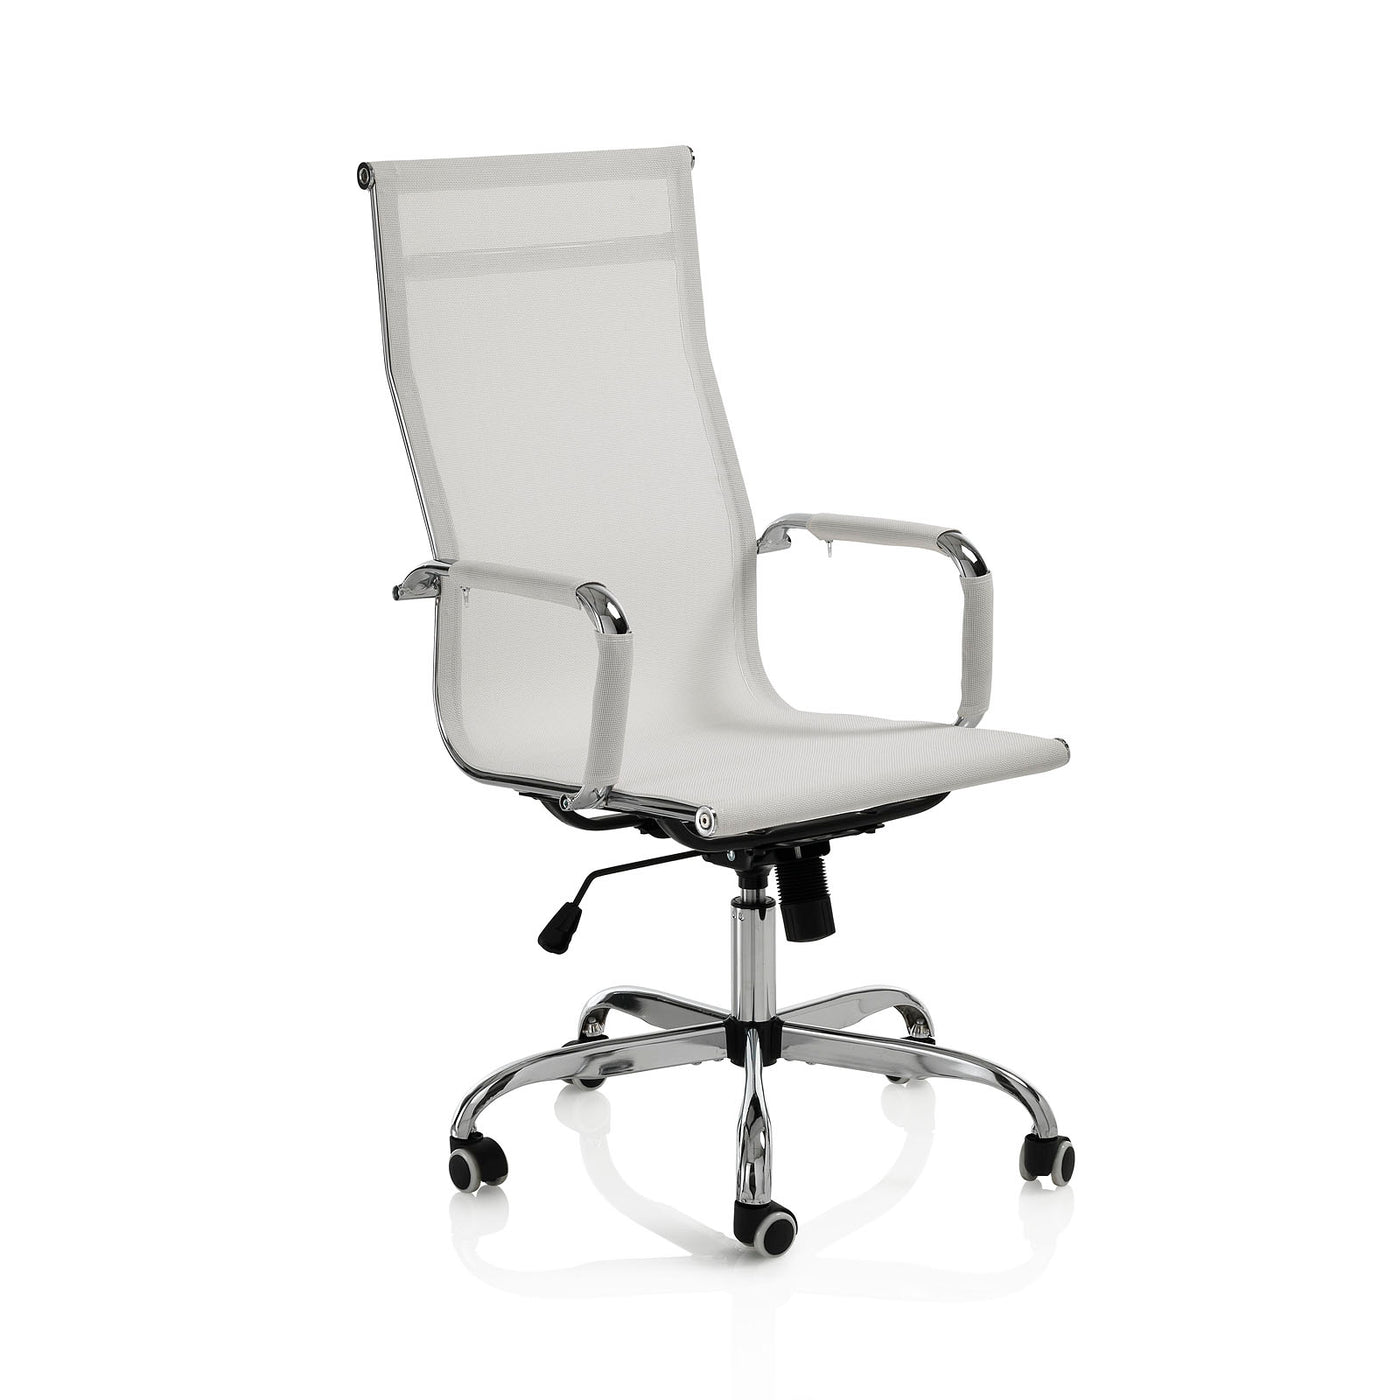 INGRID white executive office chair